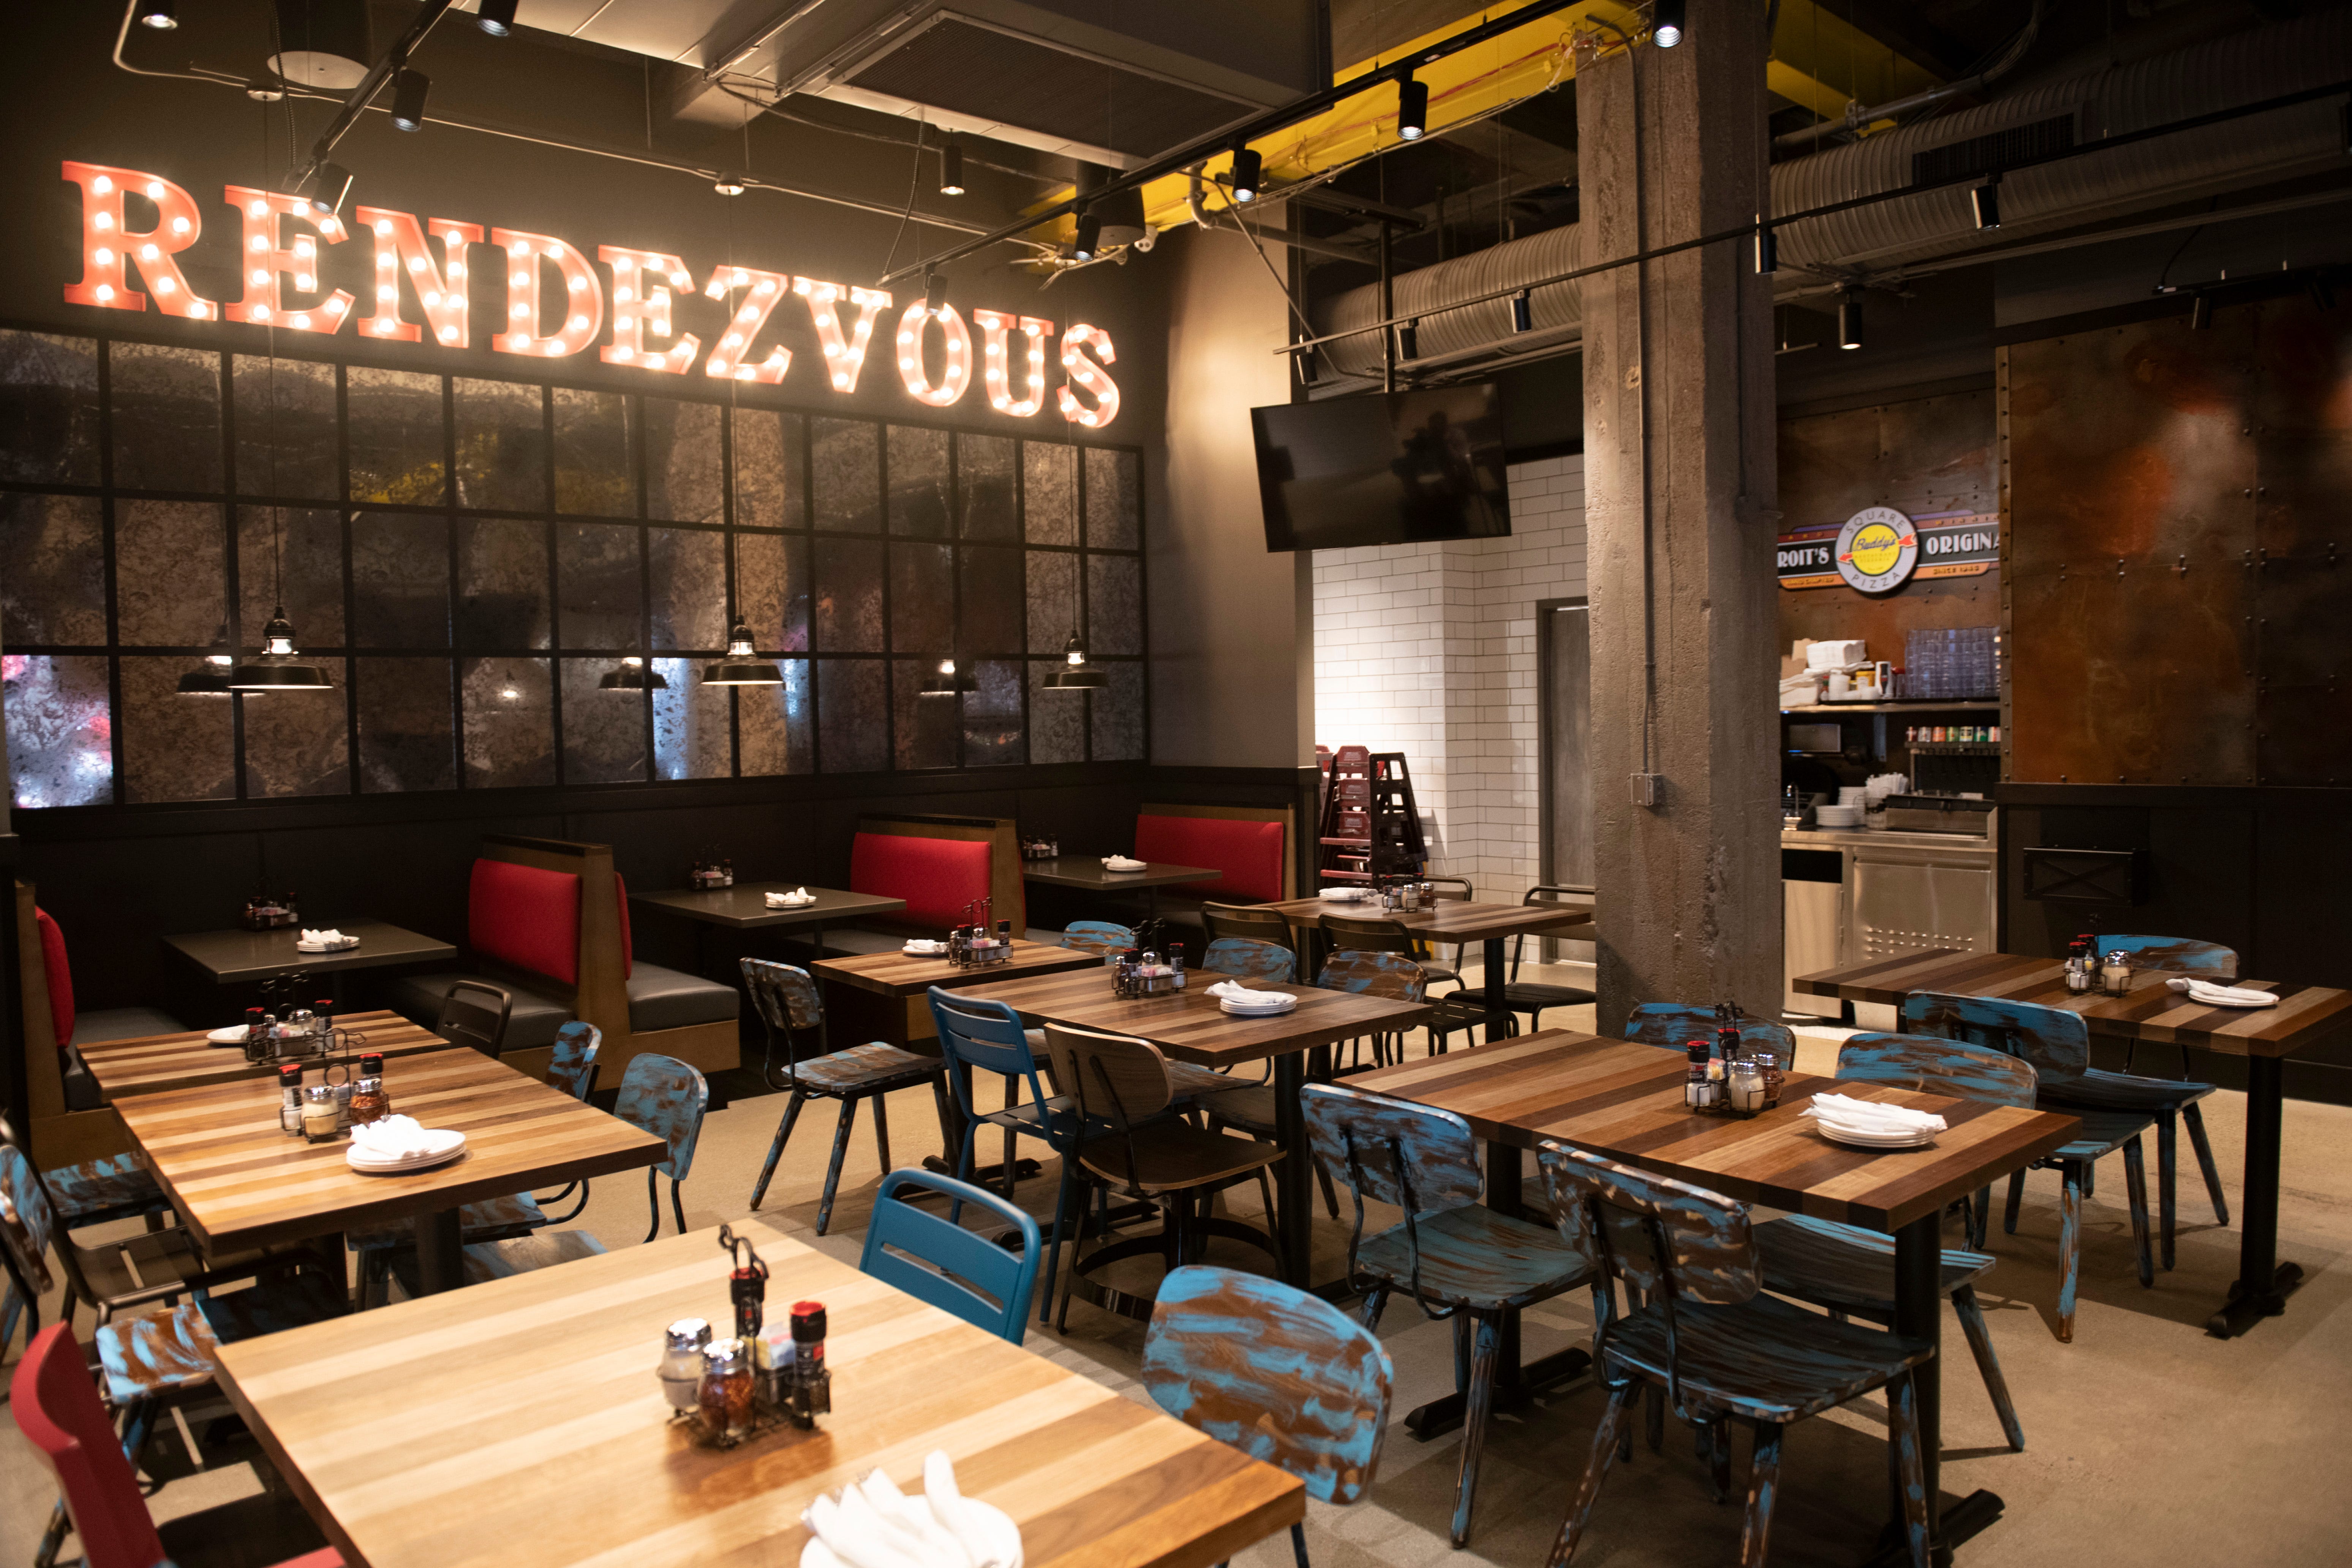 This is the Rendezvous dinning area inside Buddy's Pizza's new downtown restaurant inside the Madison Building.